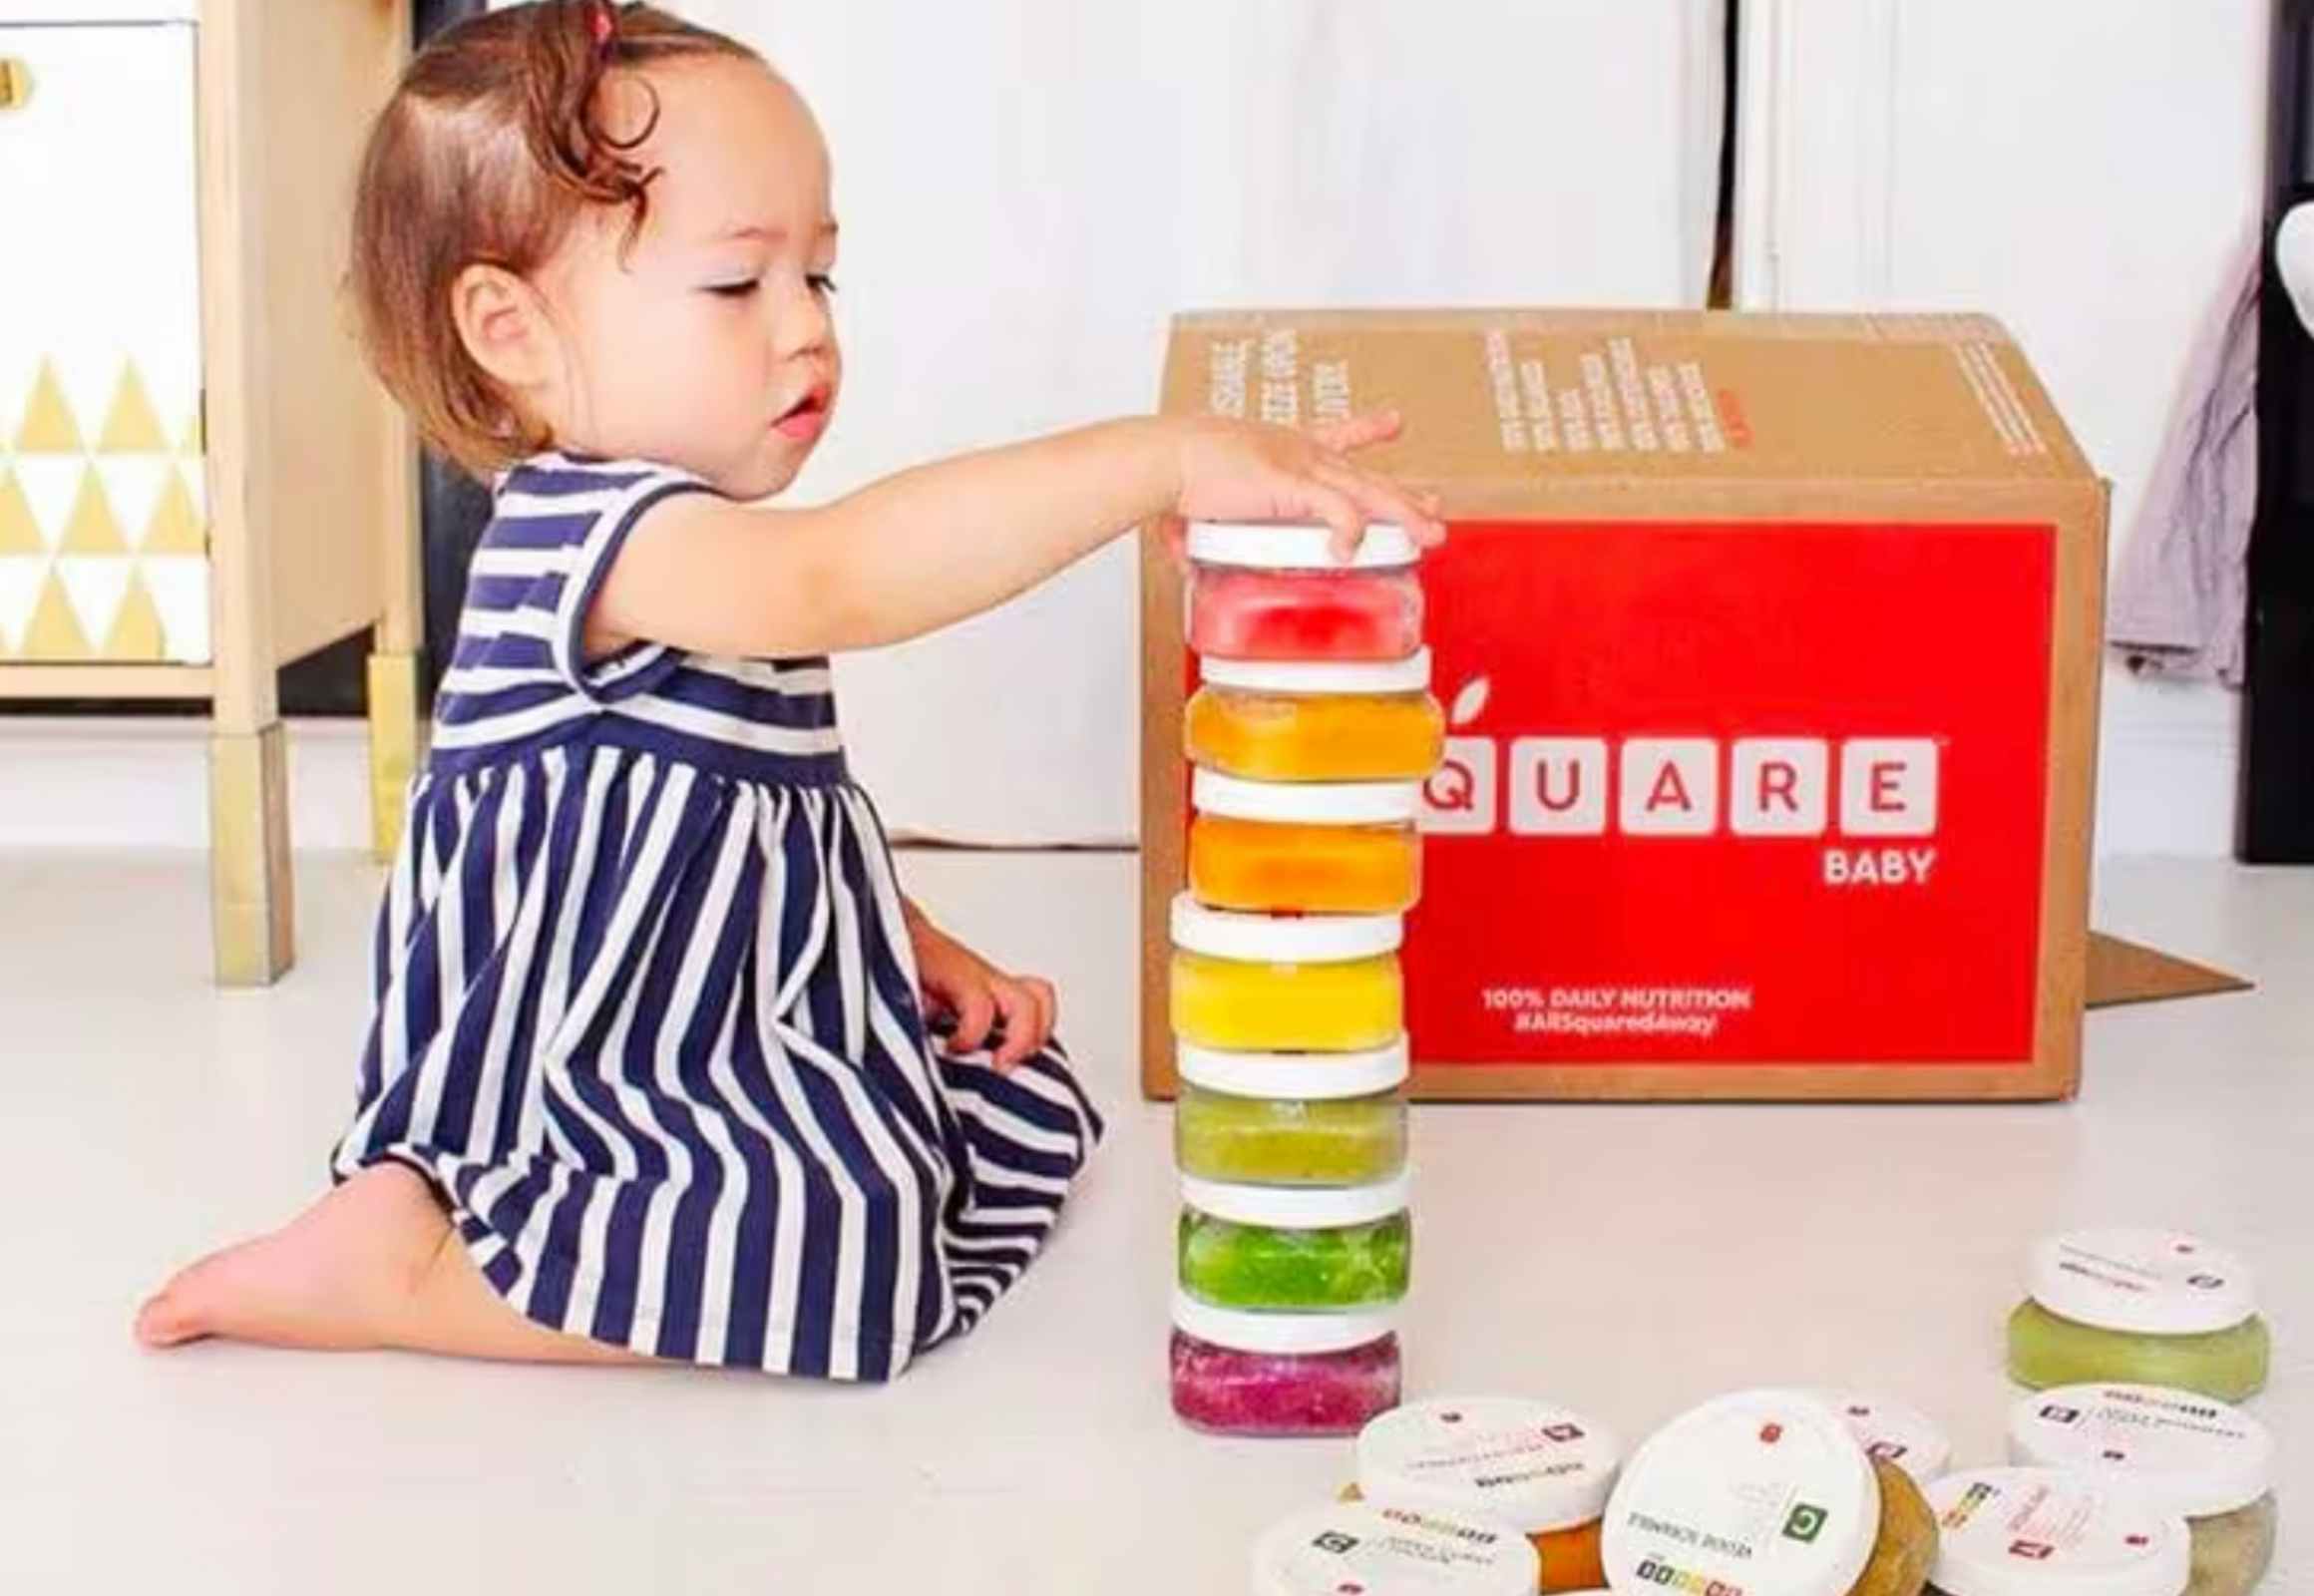  Square Baby: High-Allergen Freshly Made Baby Food, 25% Off First Order